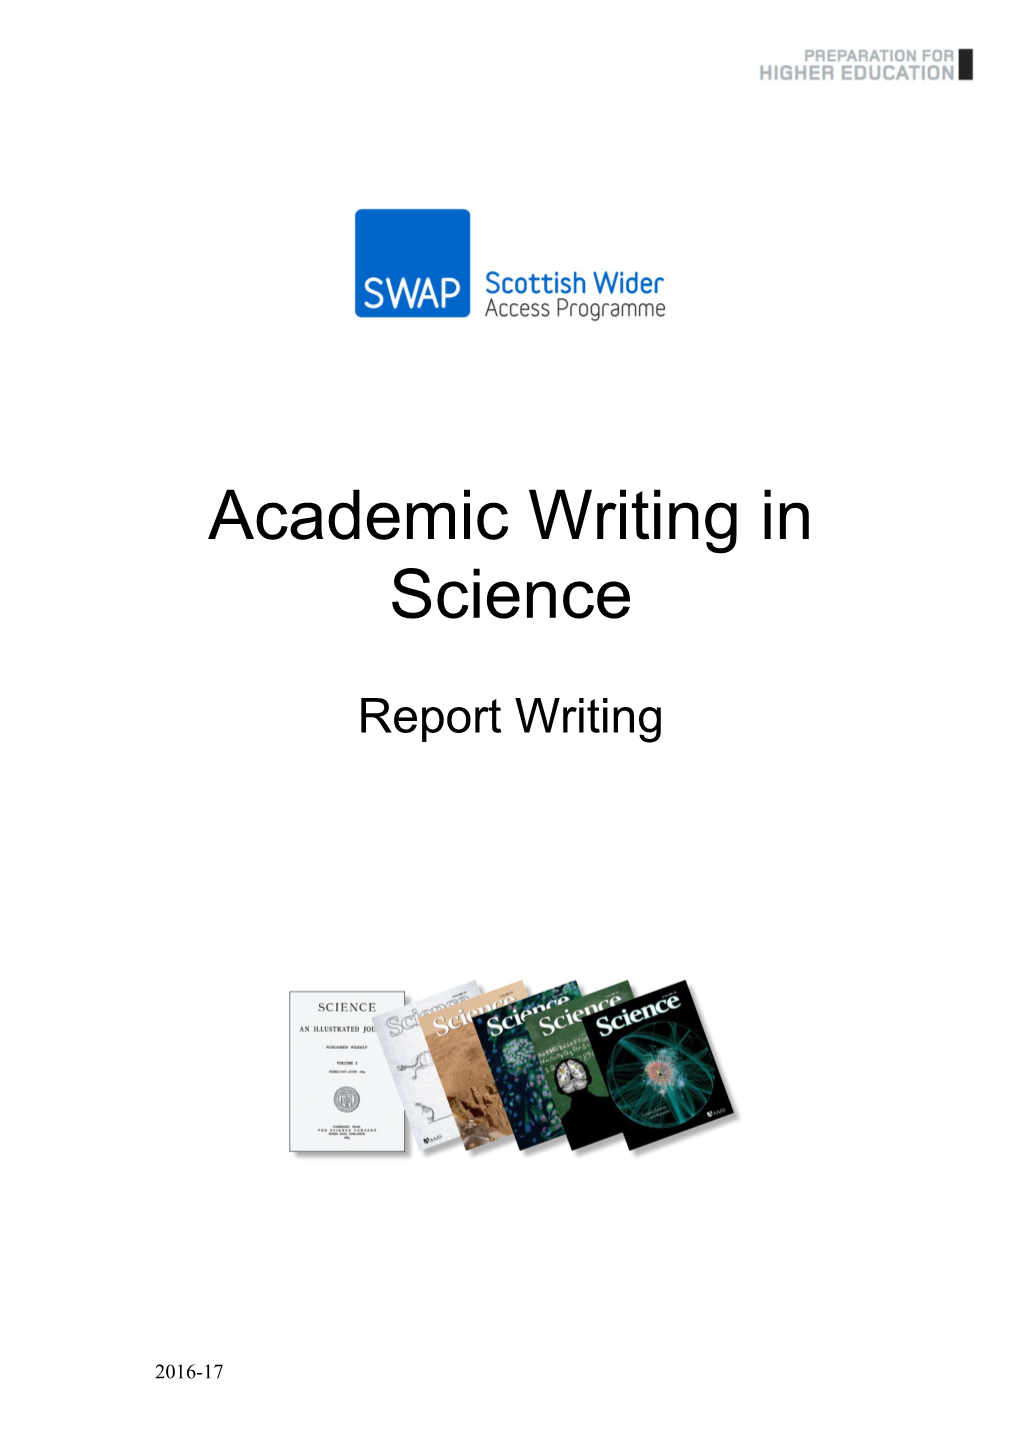 Academic Writing in Science